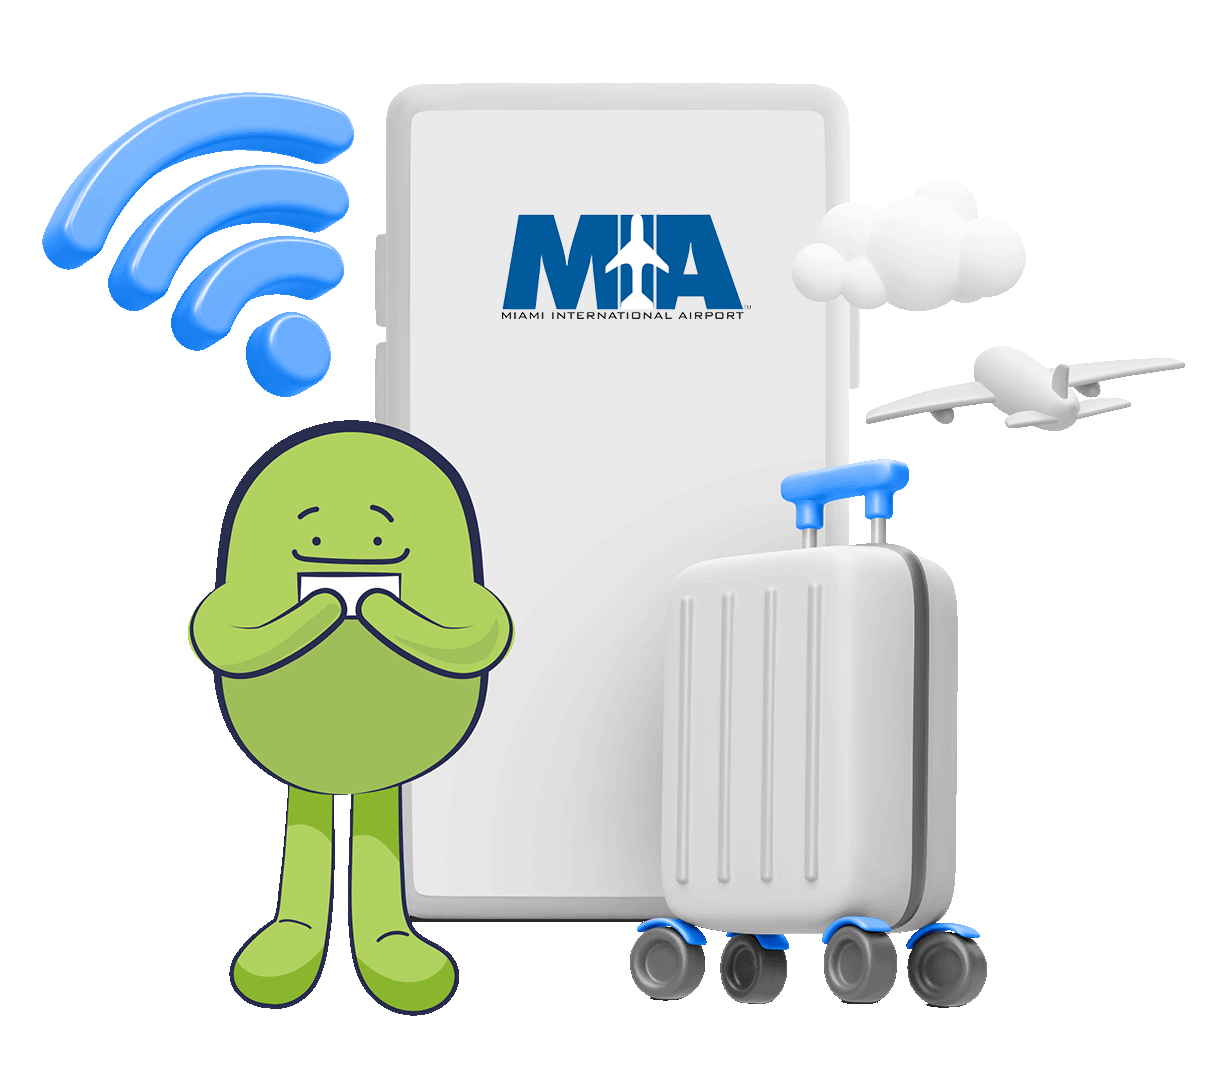 Connect to Miami Airport WiFi